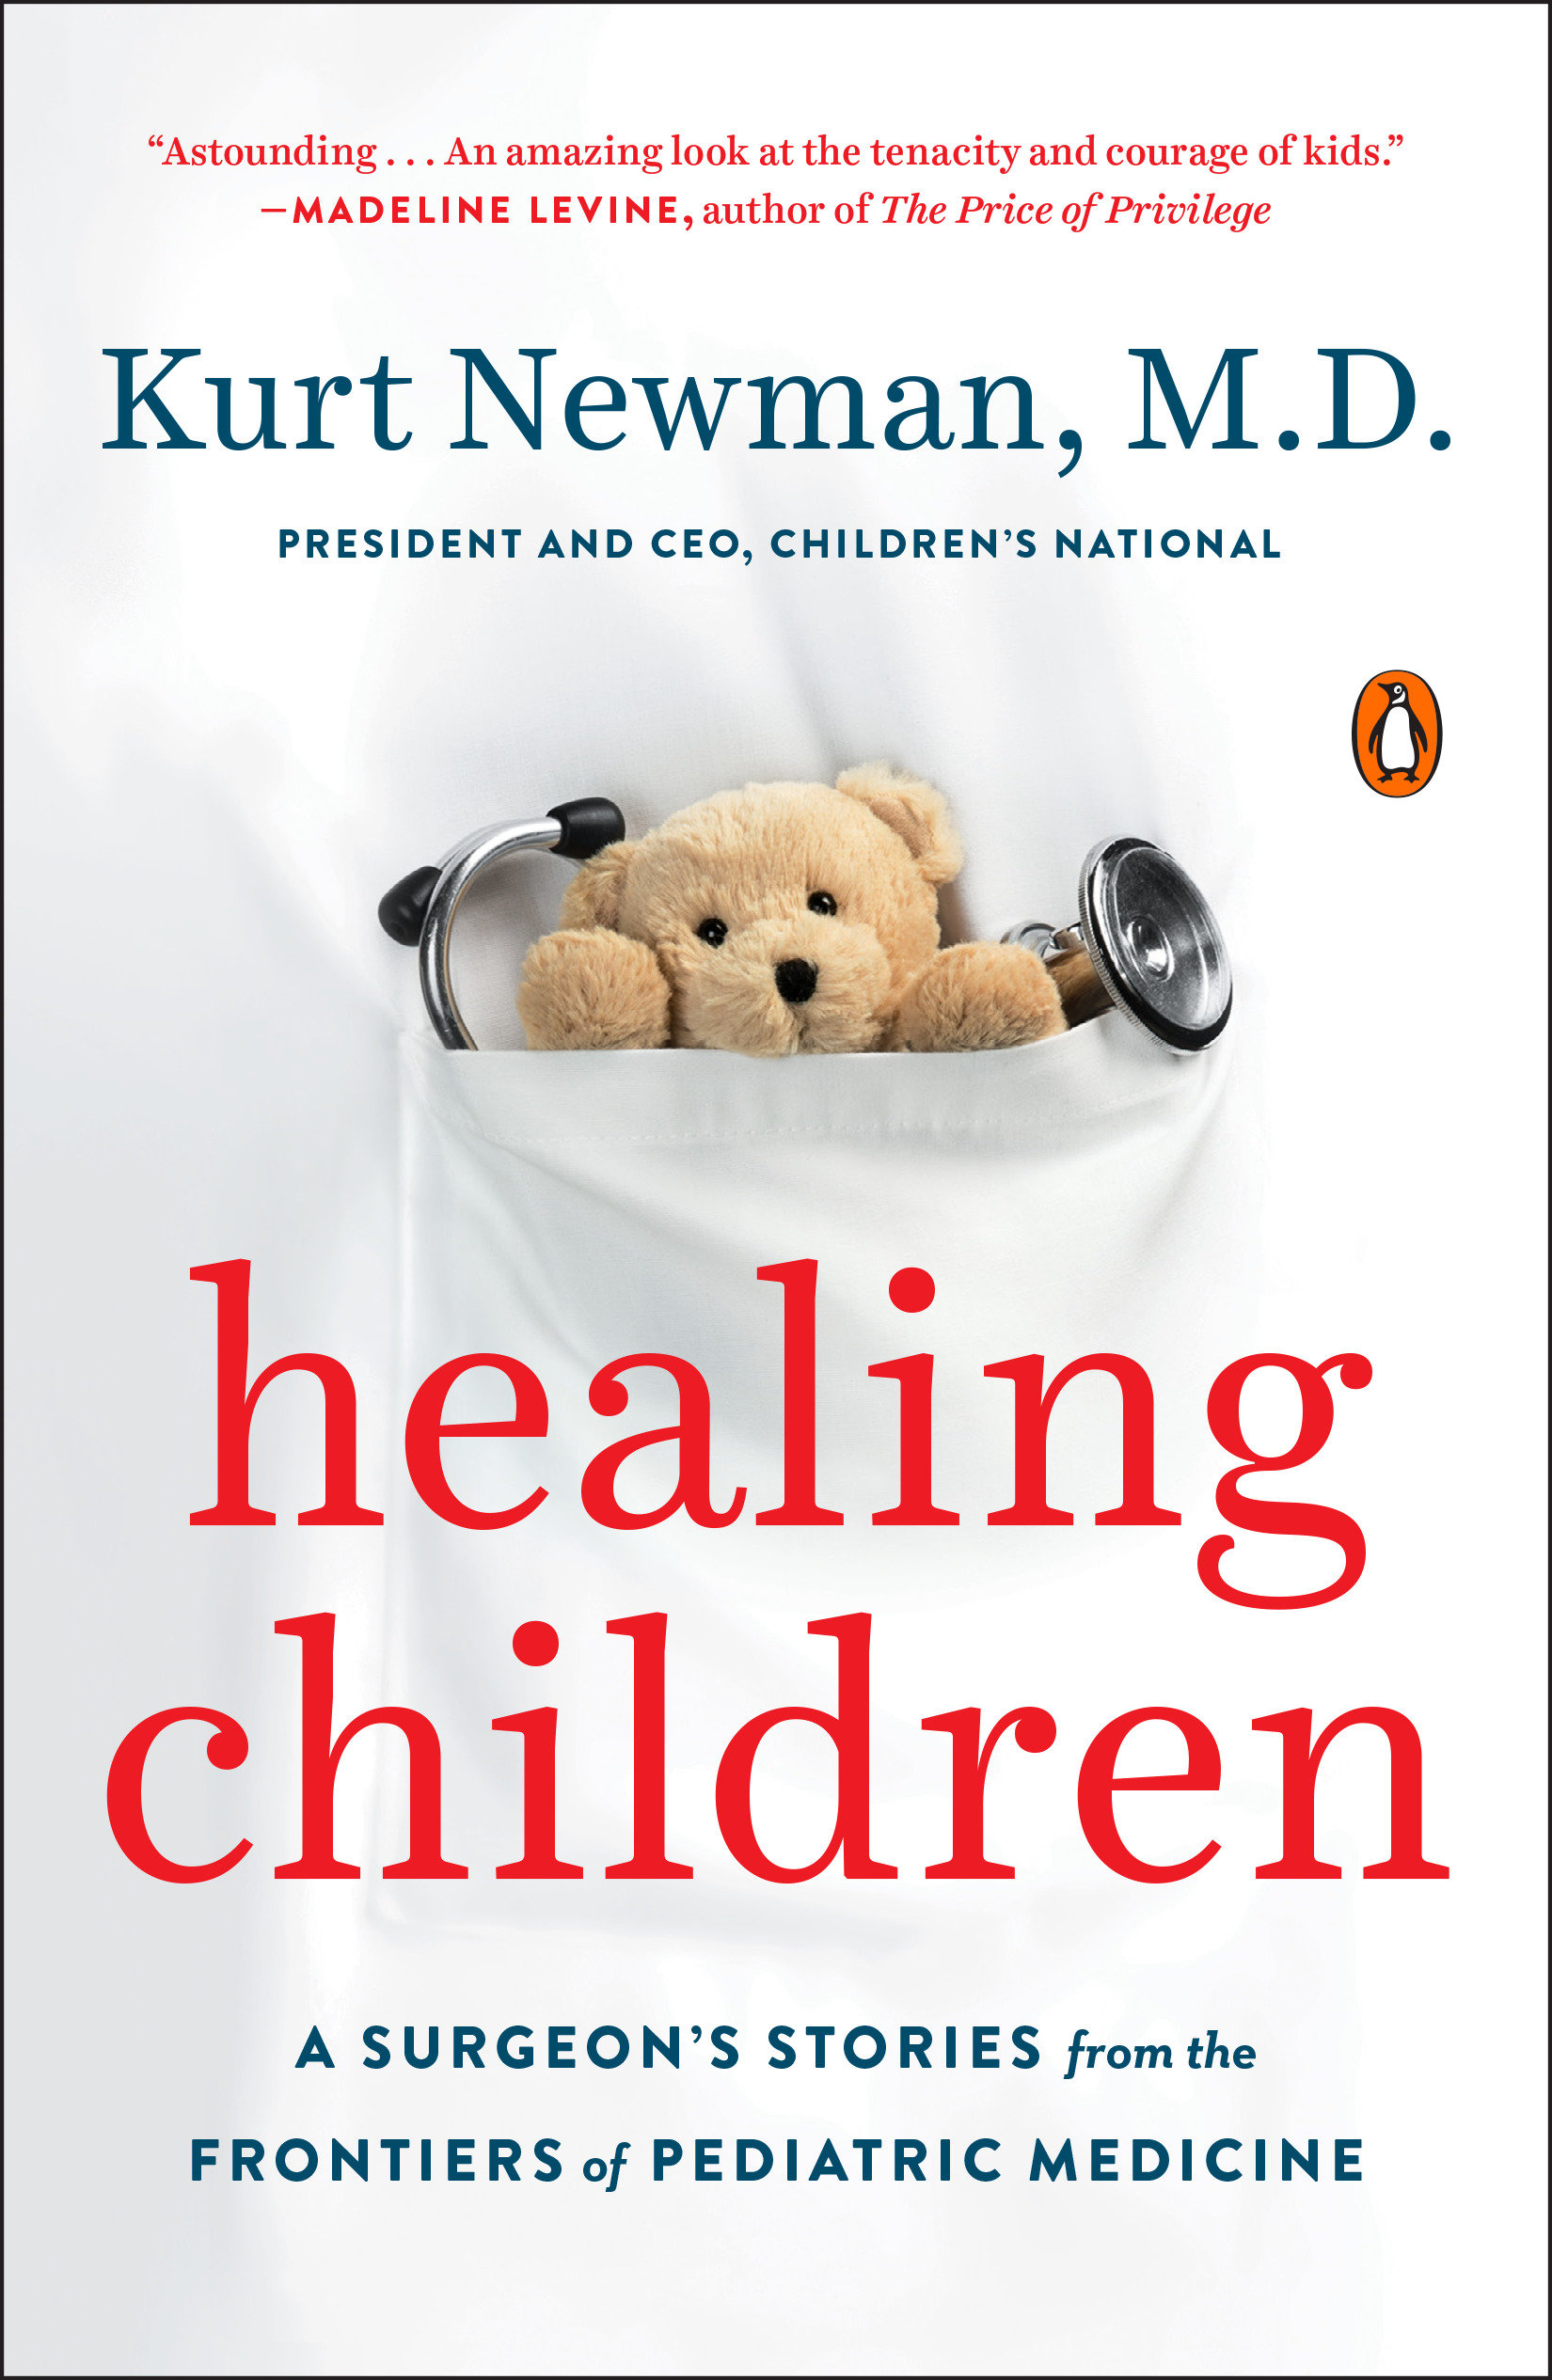 Healing children a surgeon's stories from the frontiers of pediatric medicine cover image